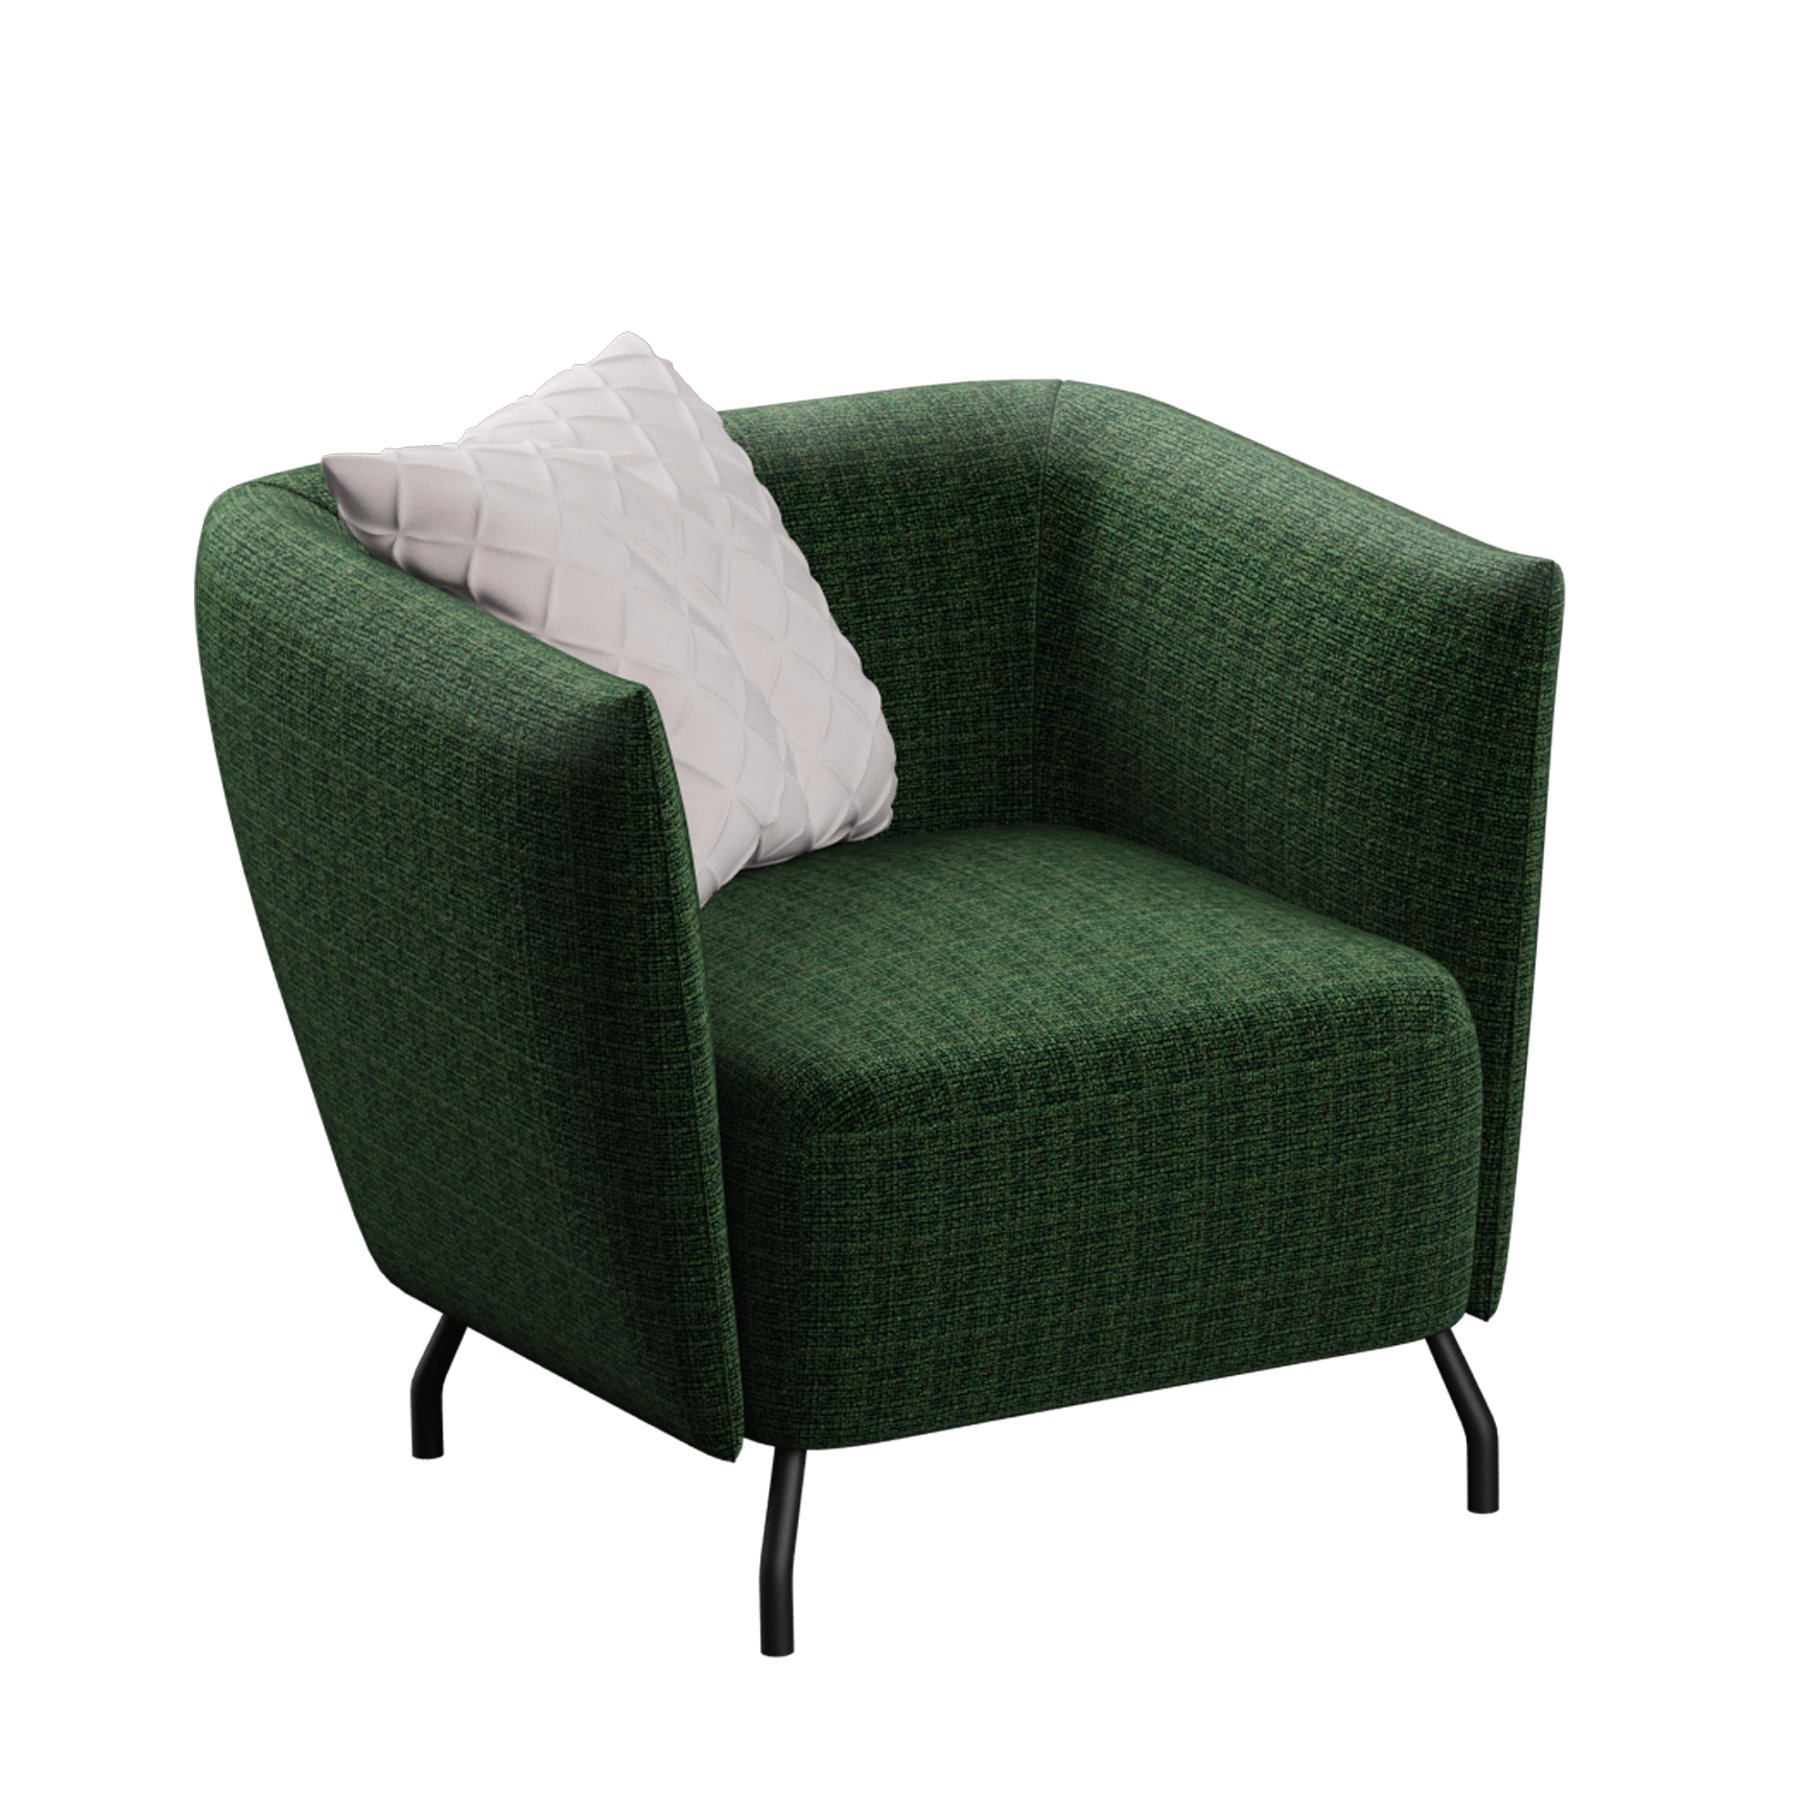 Rendering of an exquisite 3d model of a green armchair